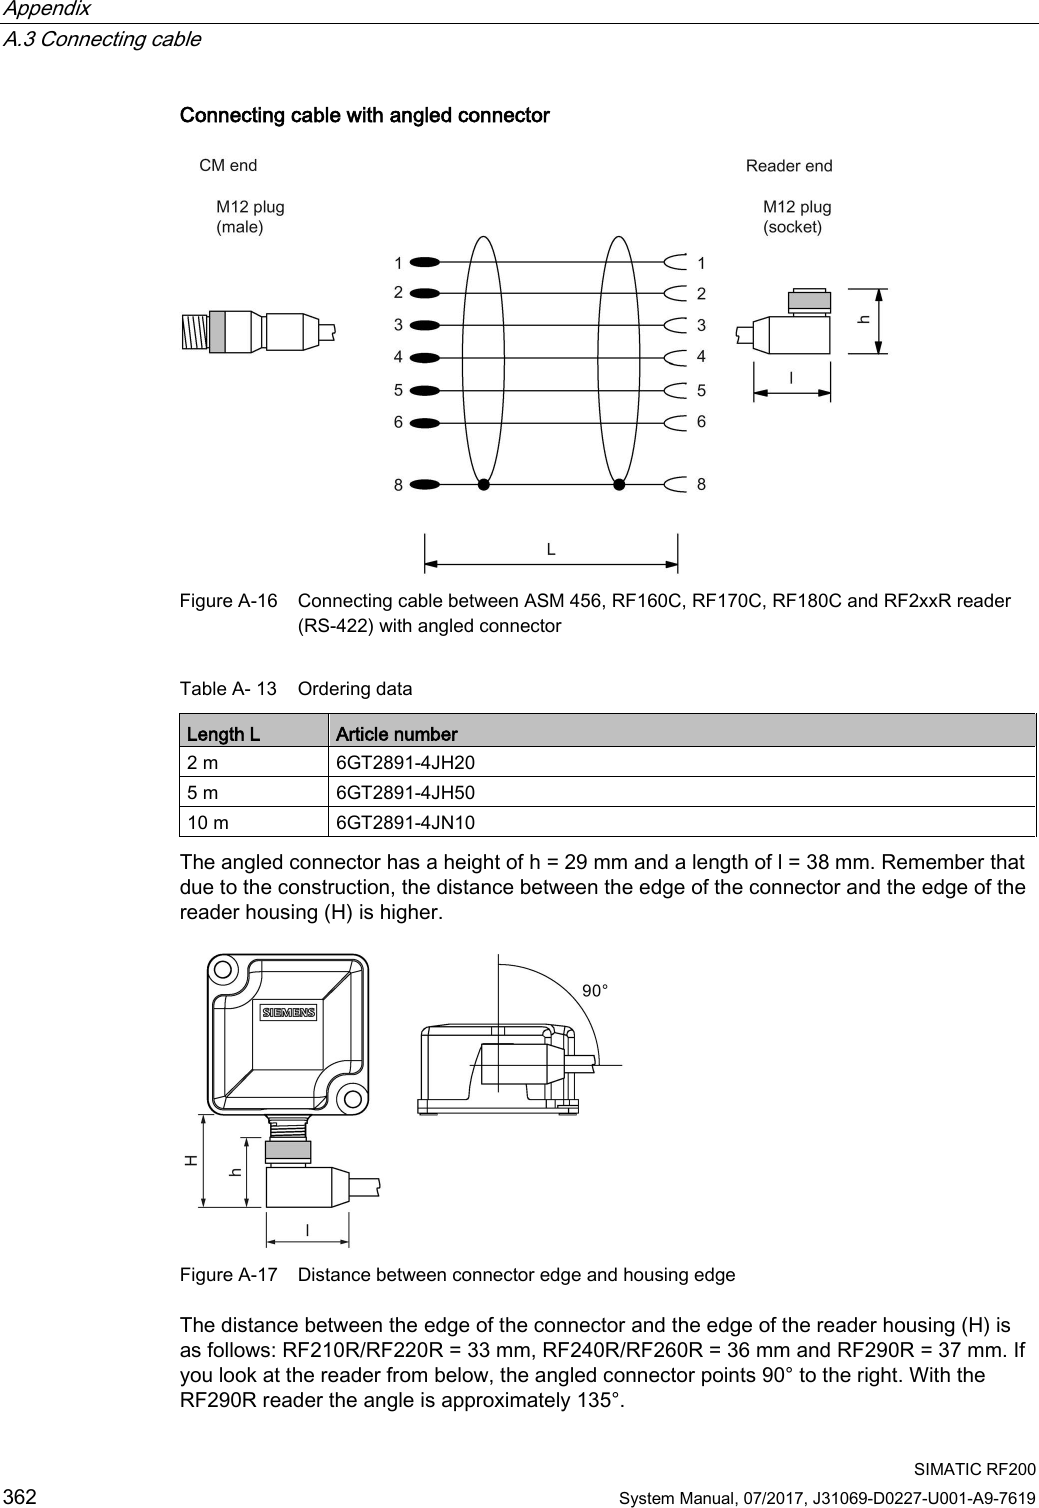 Appendix   A.3 Connecting cable  SIMATIC RF200 362 System Manual, 07/2017, J31069-D0227-U001-A9-7619 Connecting cable with angled connector  Figure A-16 Connecting cable between ASM 456, RF160C, RF170C, RF180C and RF2xxR reader (RS-422) with angled connector Table A- 13 Ordering data Length L Article number 2 m 6GT2891-4JH20 5 m 6GT2891-4JH50 10 m 6GT2891-4JN10 The angled connector has a height of h = 29 mm and a length of l = 38 mm. Remember that due to the construction, the distance between the edge of the connector and the edge of the reader housing (H) is higher.  Figure A-17 Distance between connector edge and housing edge The distance between the edge of the connector and the edge of the reader housing (H) is as follows: RF210R/RF220R = 33 mm, RF240R/RF260R = 36 mm and RF290R = 37 mm. If you look at the reader from below, the angled connector points 90° to the right. With the RF290R reader the angle is approximately 135°. 